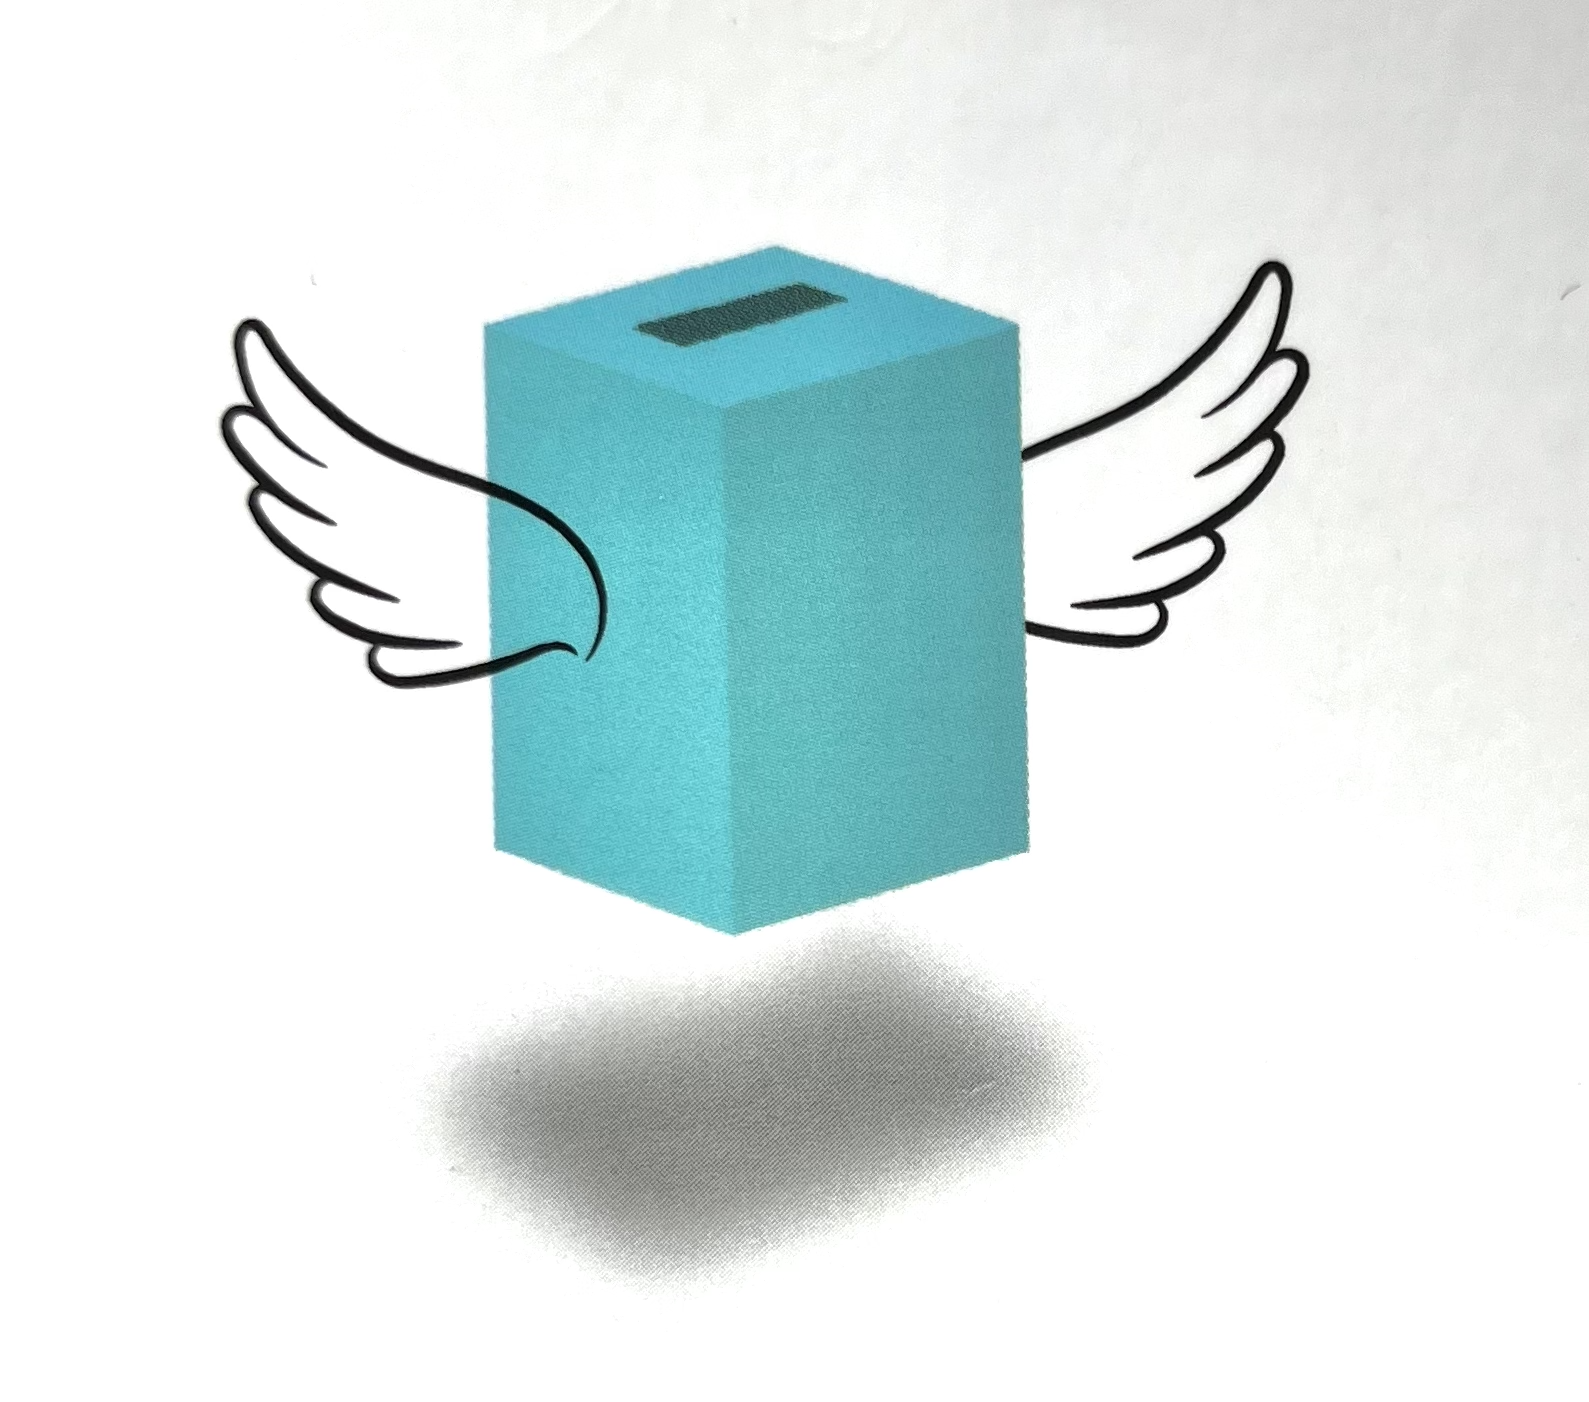 Teal coloured ballot box with wings Image credit: cover image from Voices of Us, Tim Dunlop.